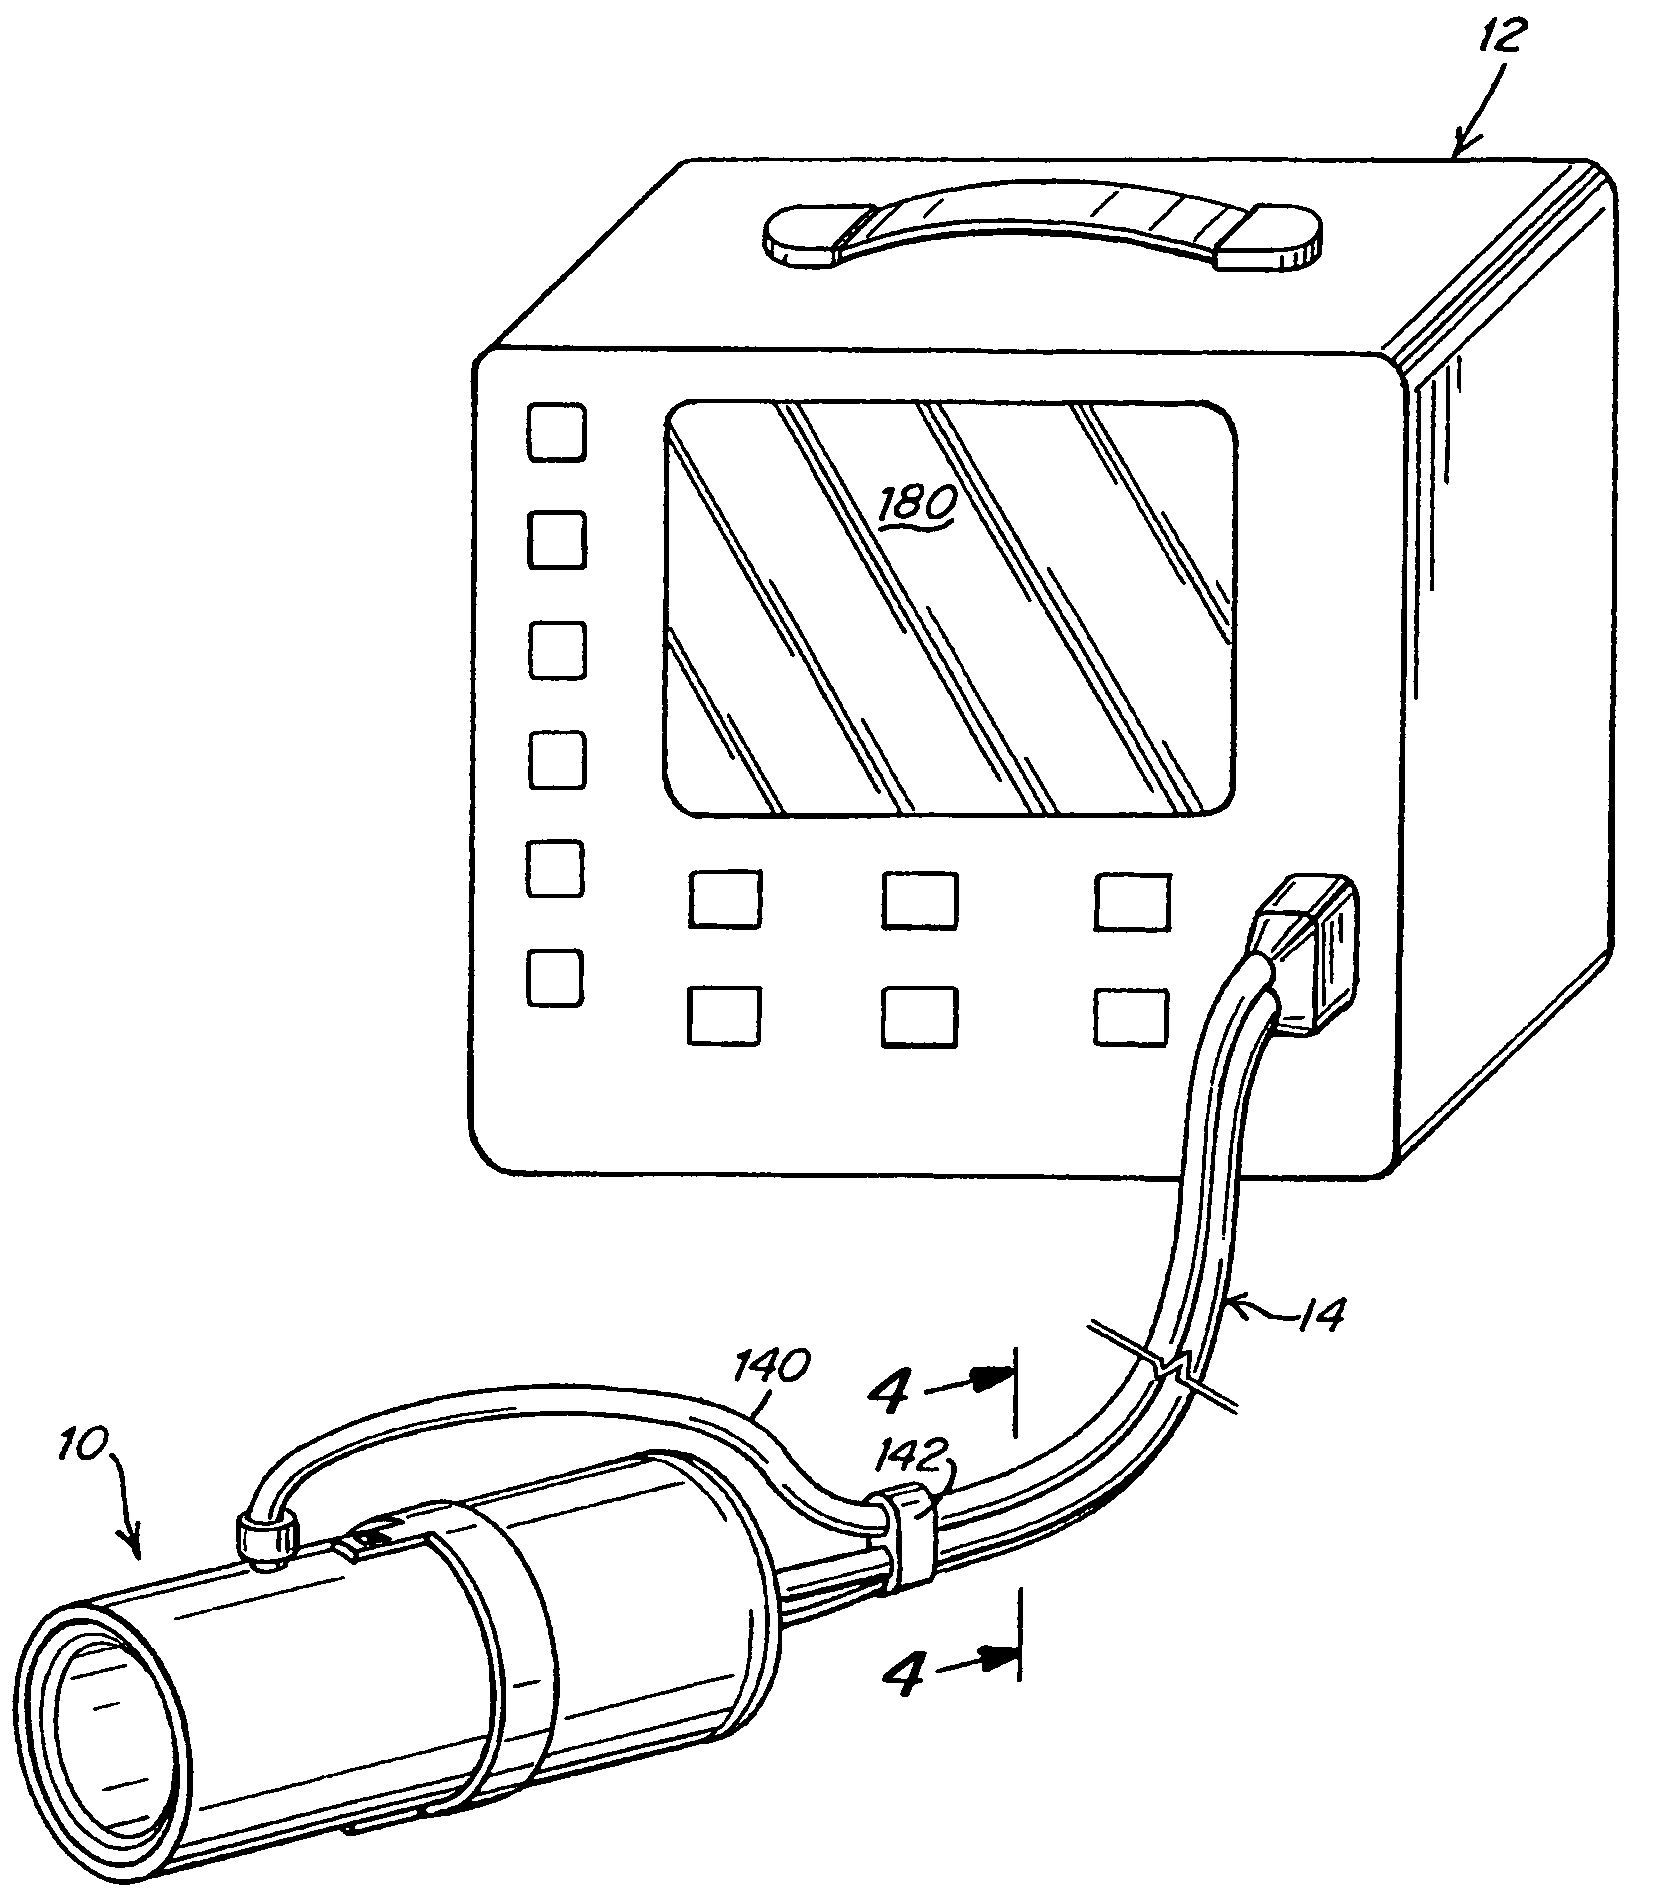 Non-invasive blood pressure monitoring device and methods